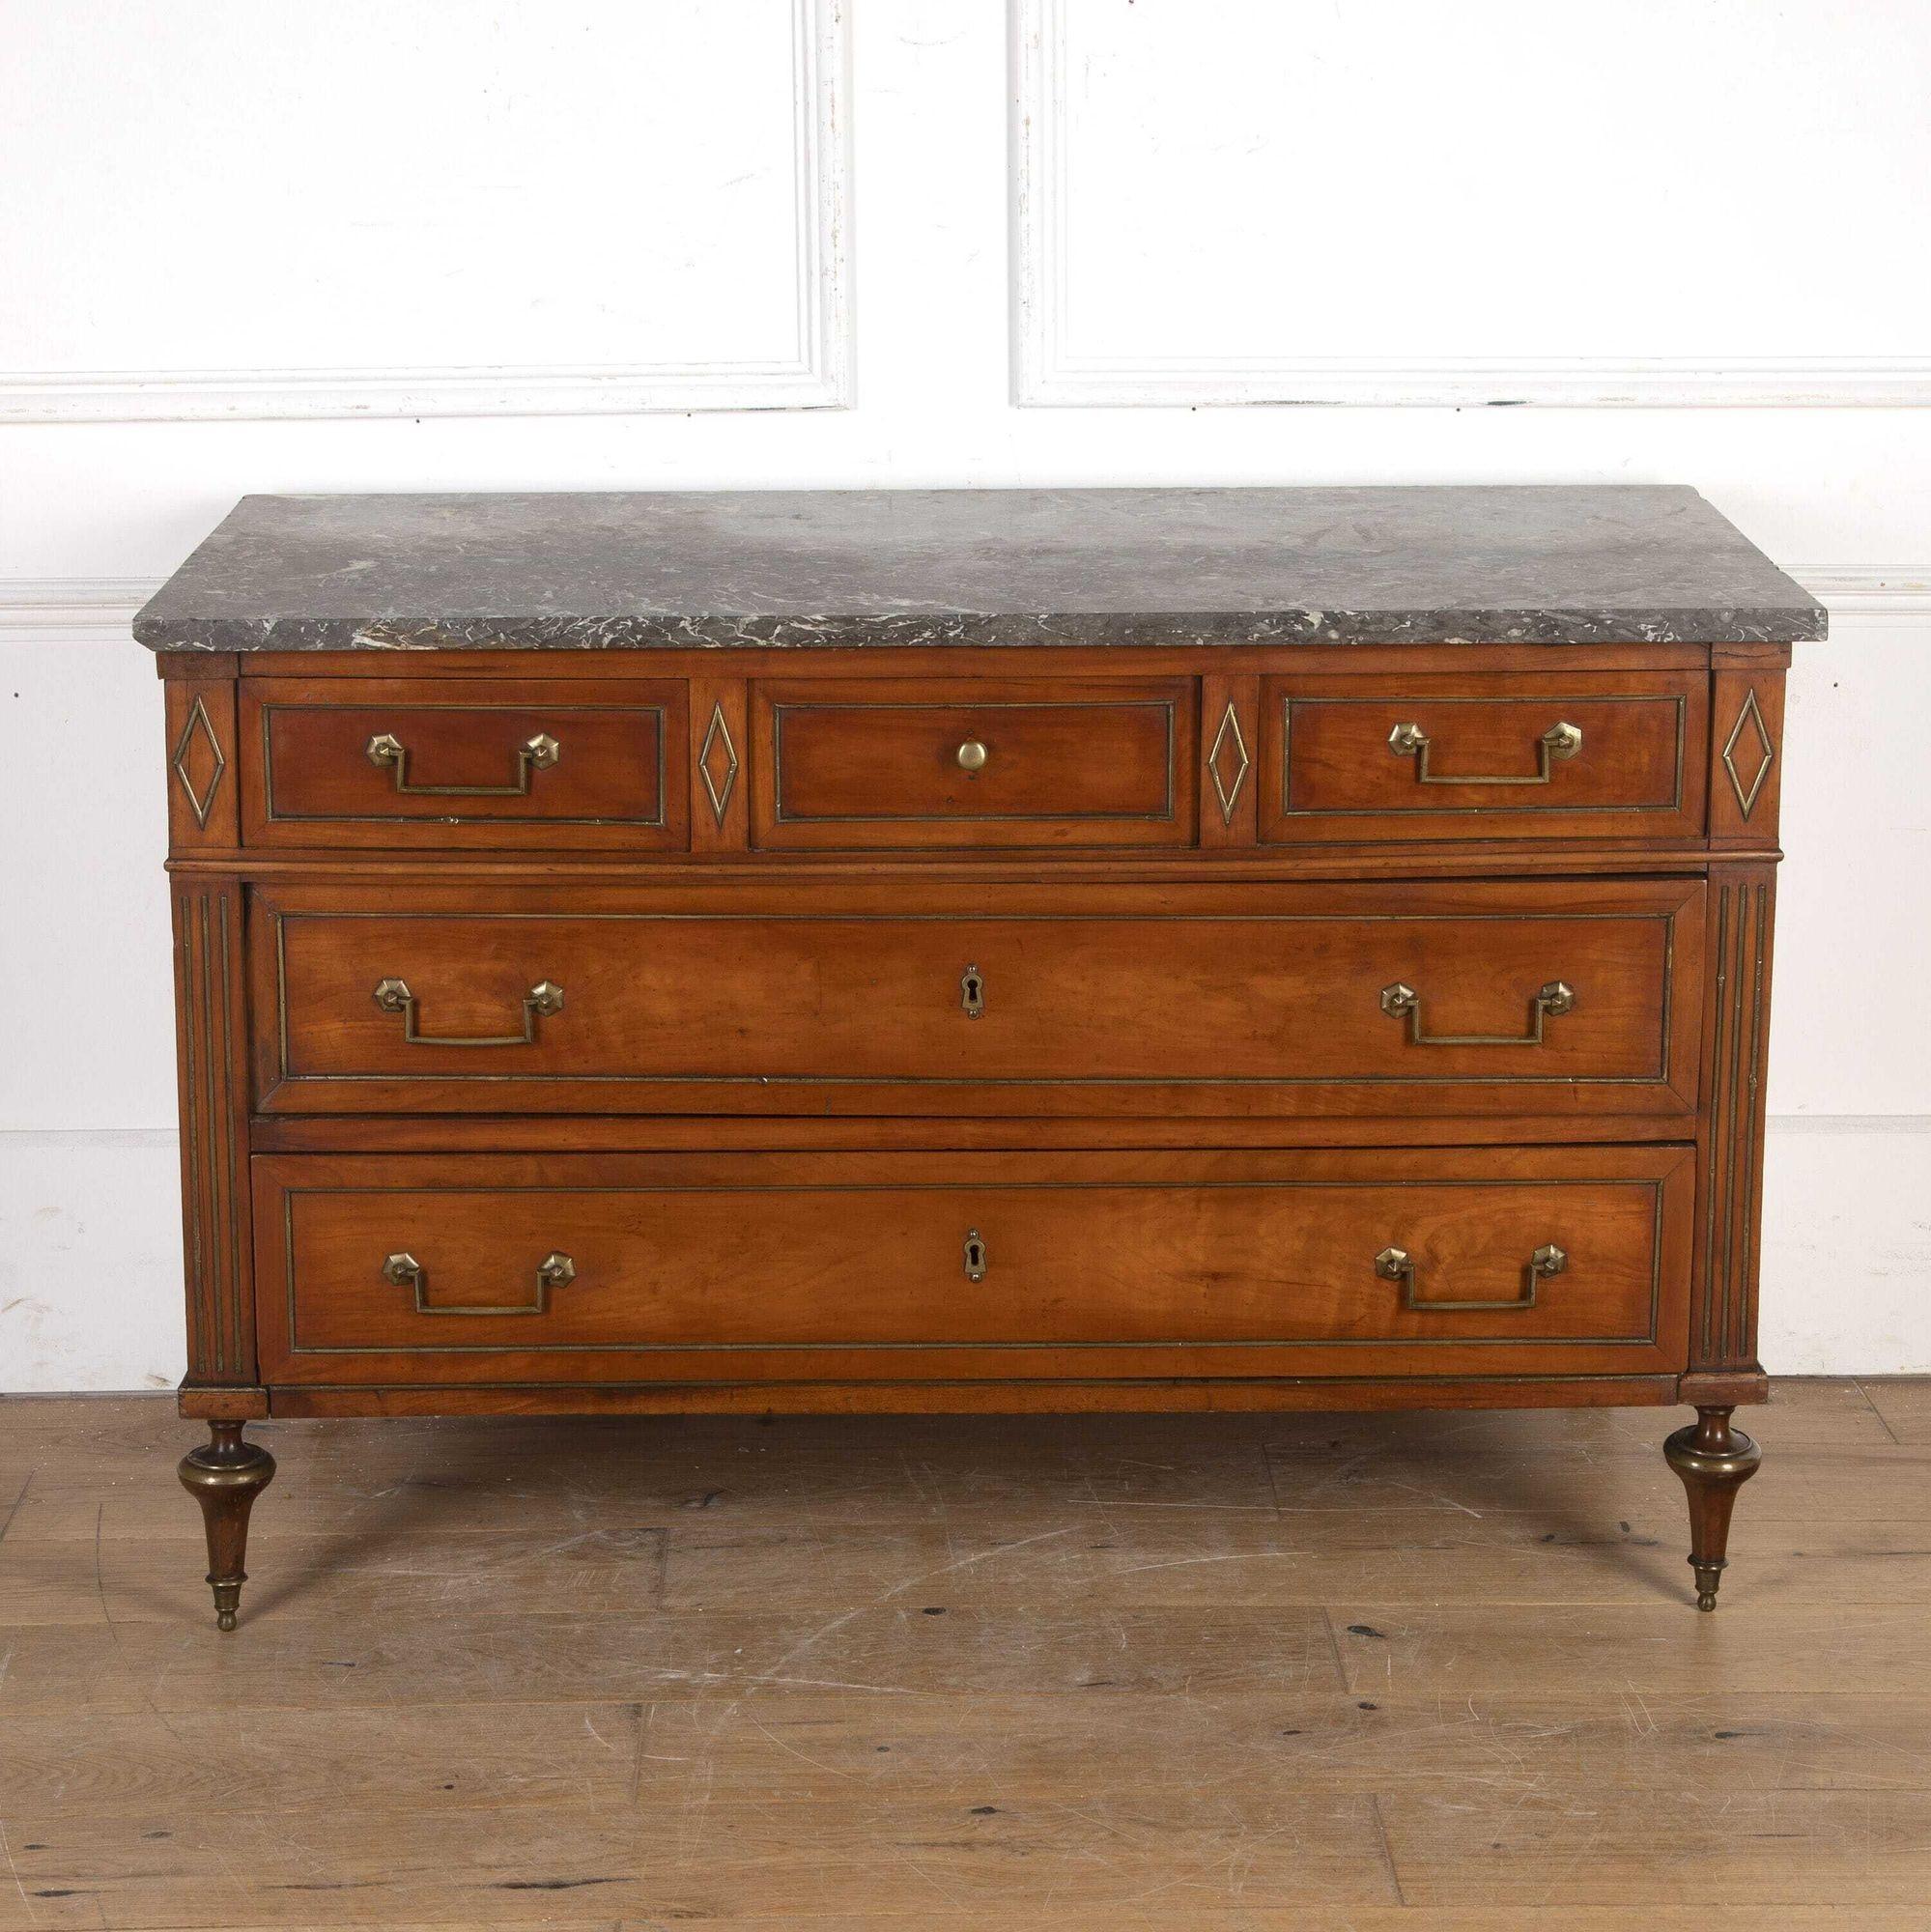 Beautiful French 19th century cherrywood commode in the Louis XVI style.
This commode has a very refined and elegant rectilinear profile and exhibits beautiful colour and patina throughout.
The nicely figured grey marble top sits over an